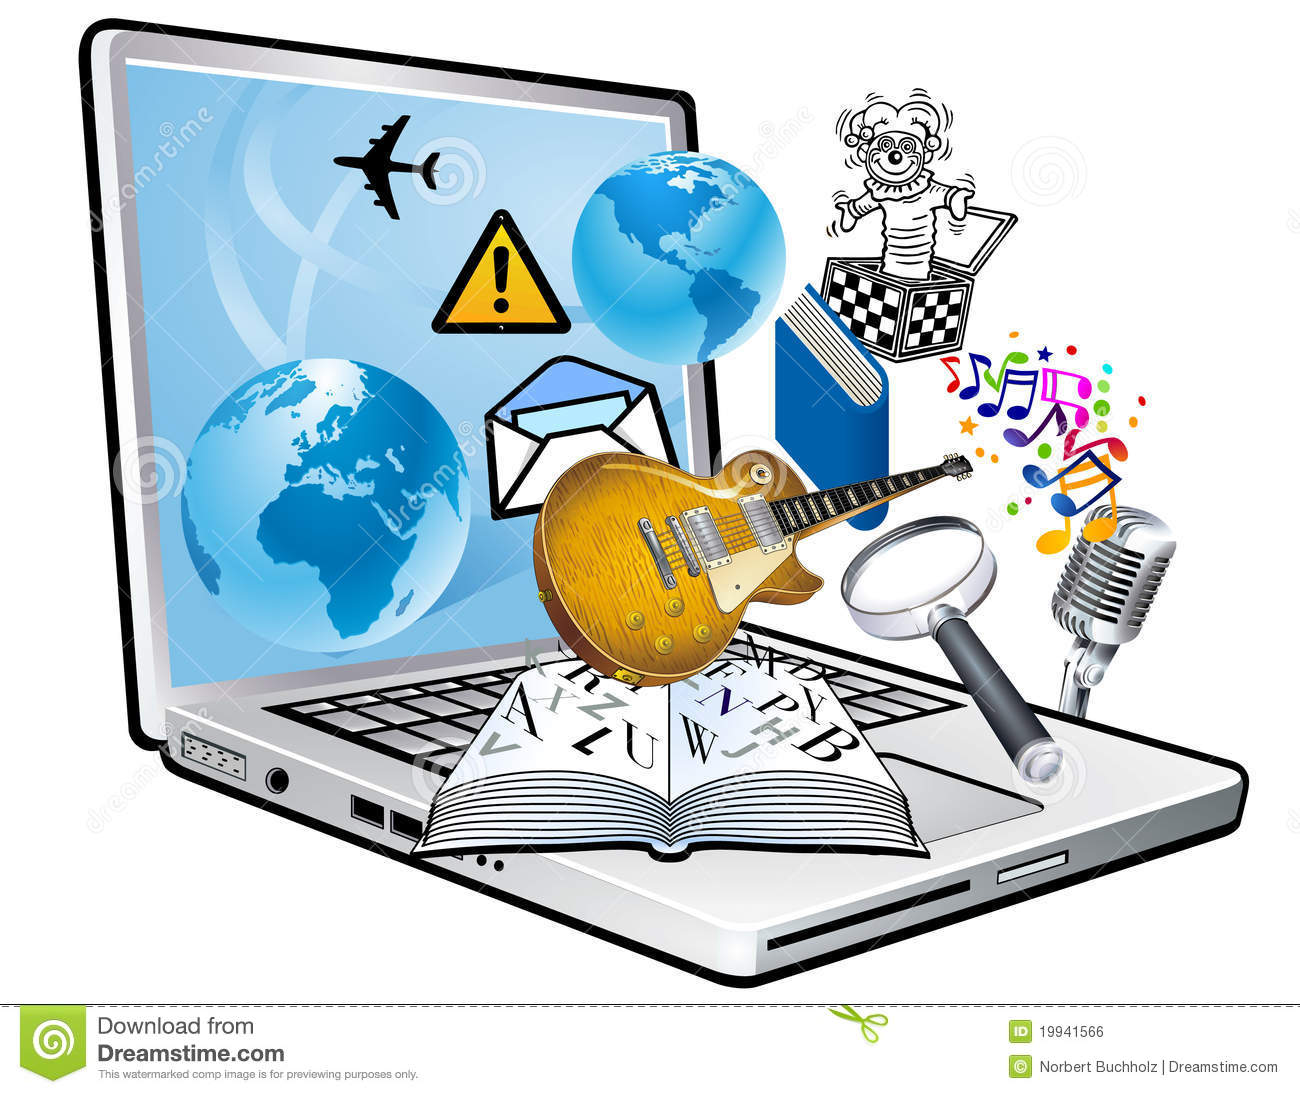 Information technology clipart 5 » Clipart Station.